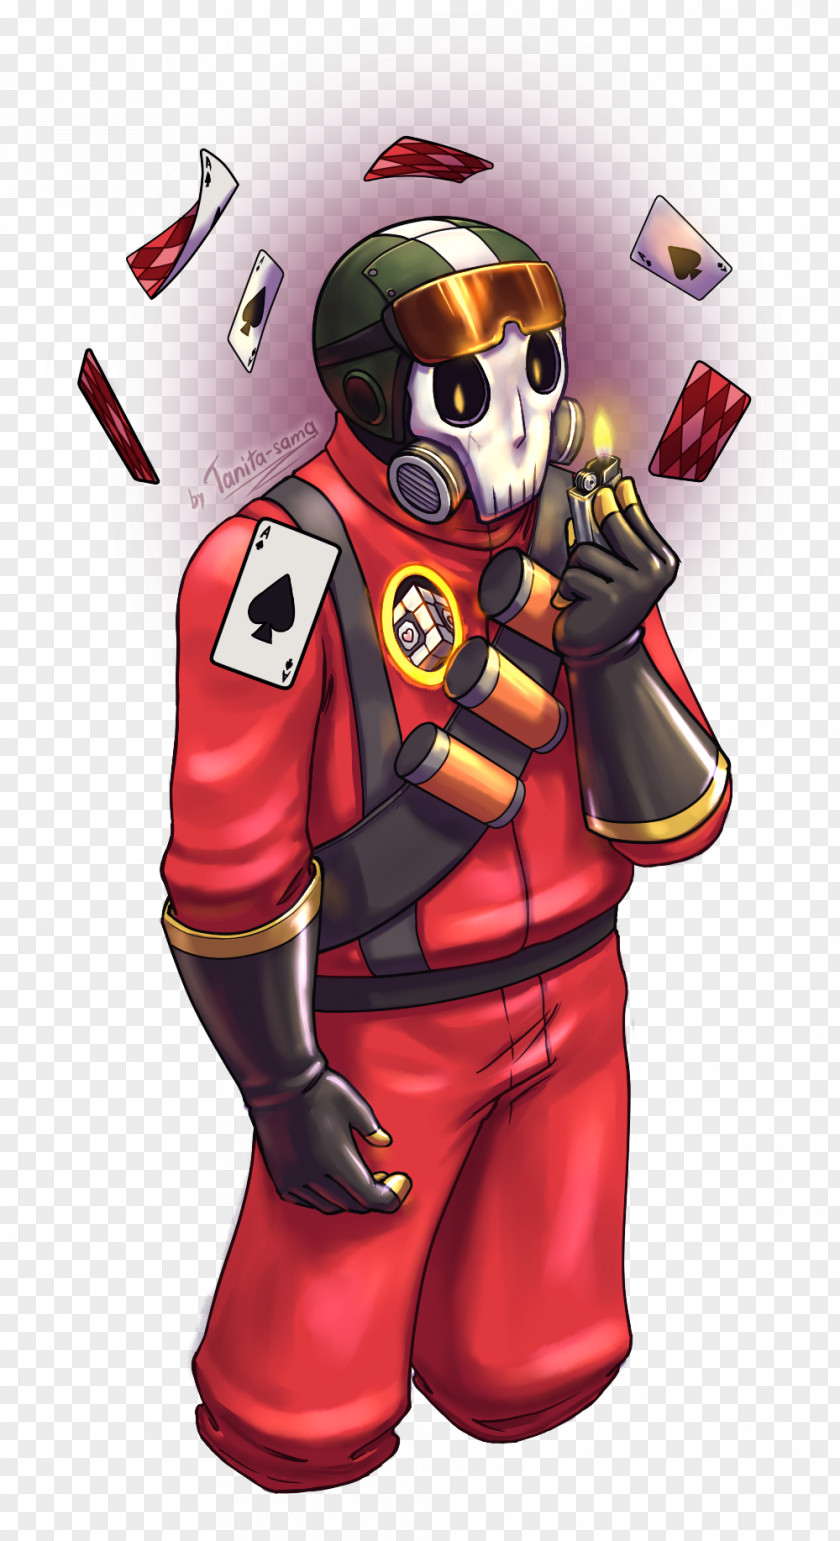 Tf2 Scout Fanart Team Fortress 2 Work Of Art American Football Protective Gear PNG